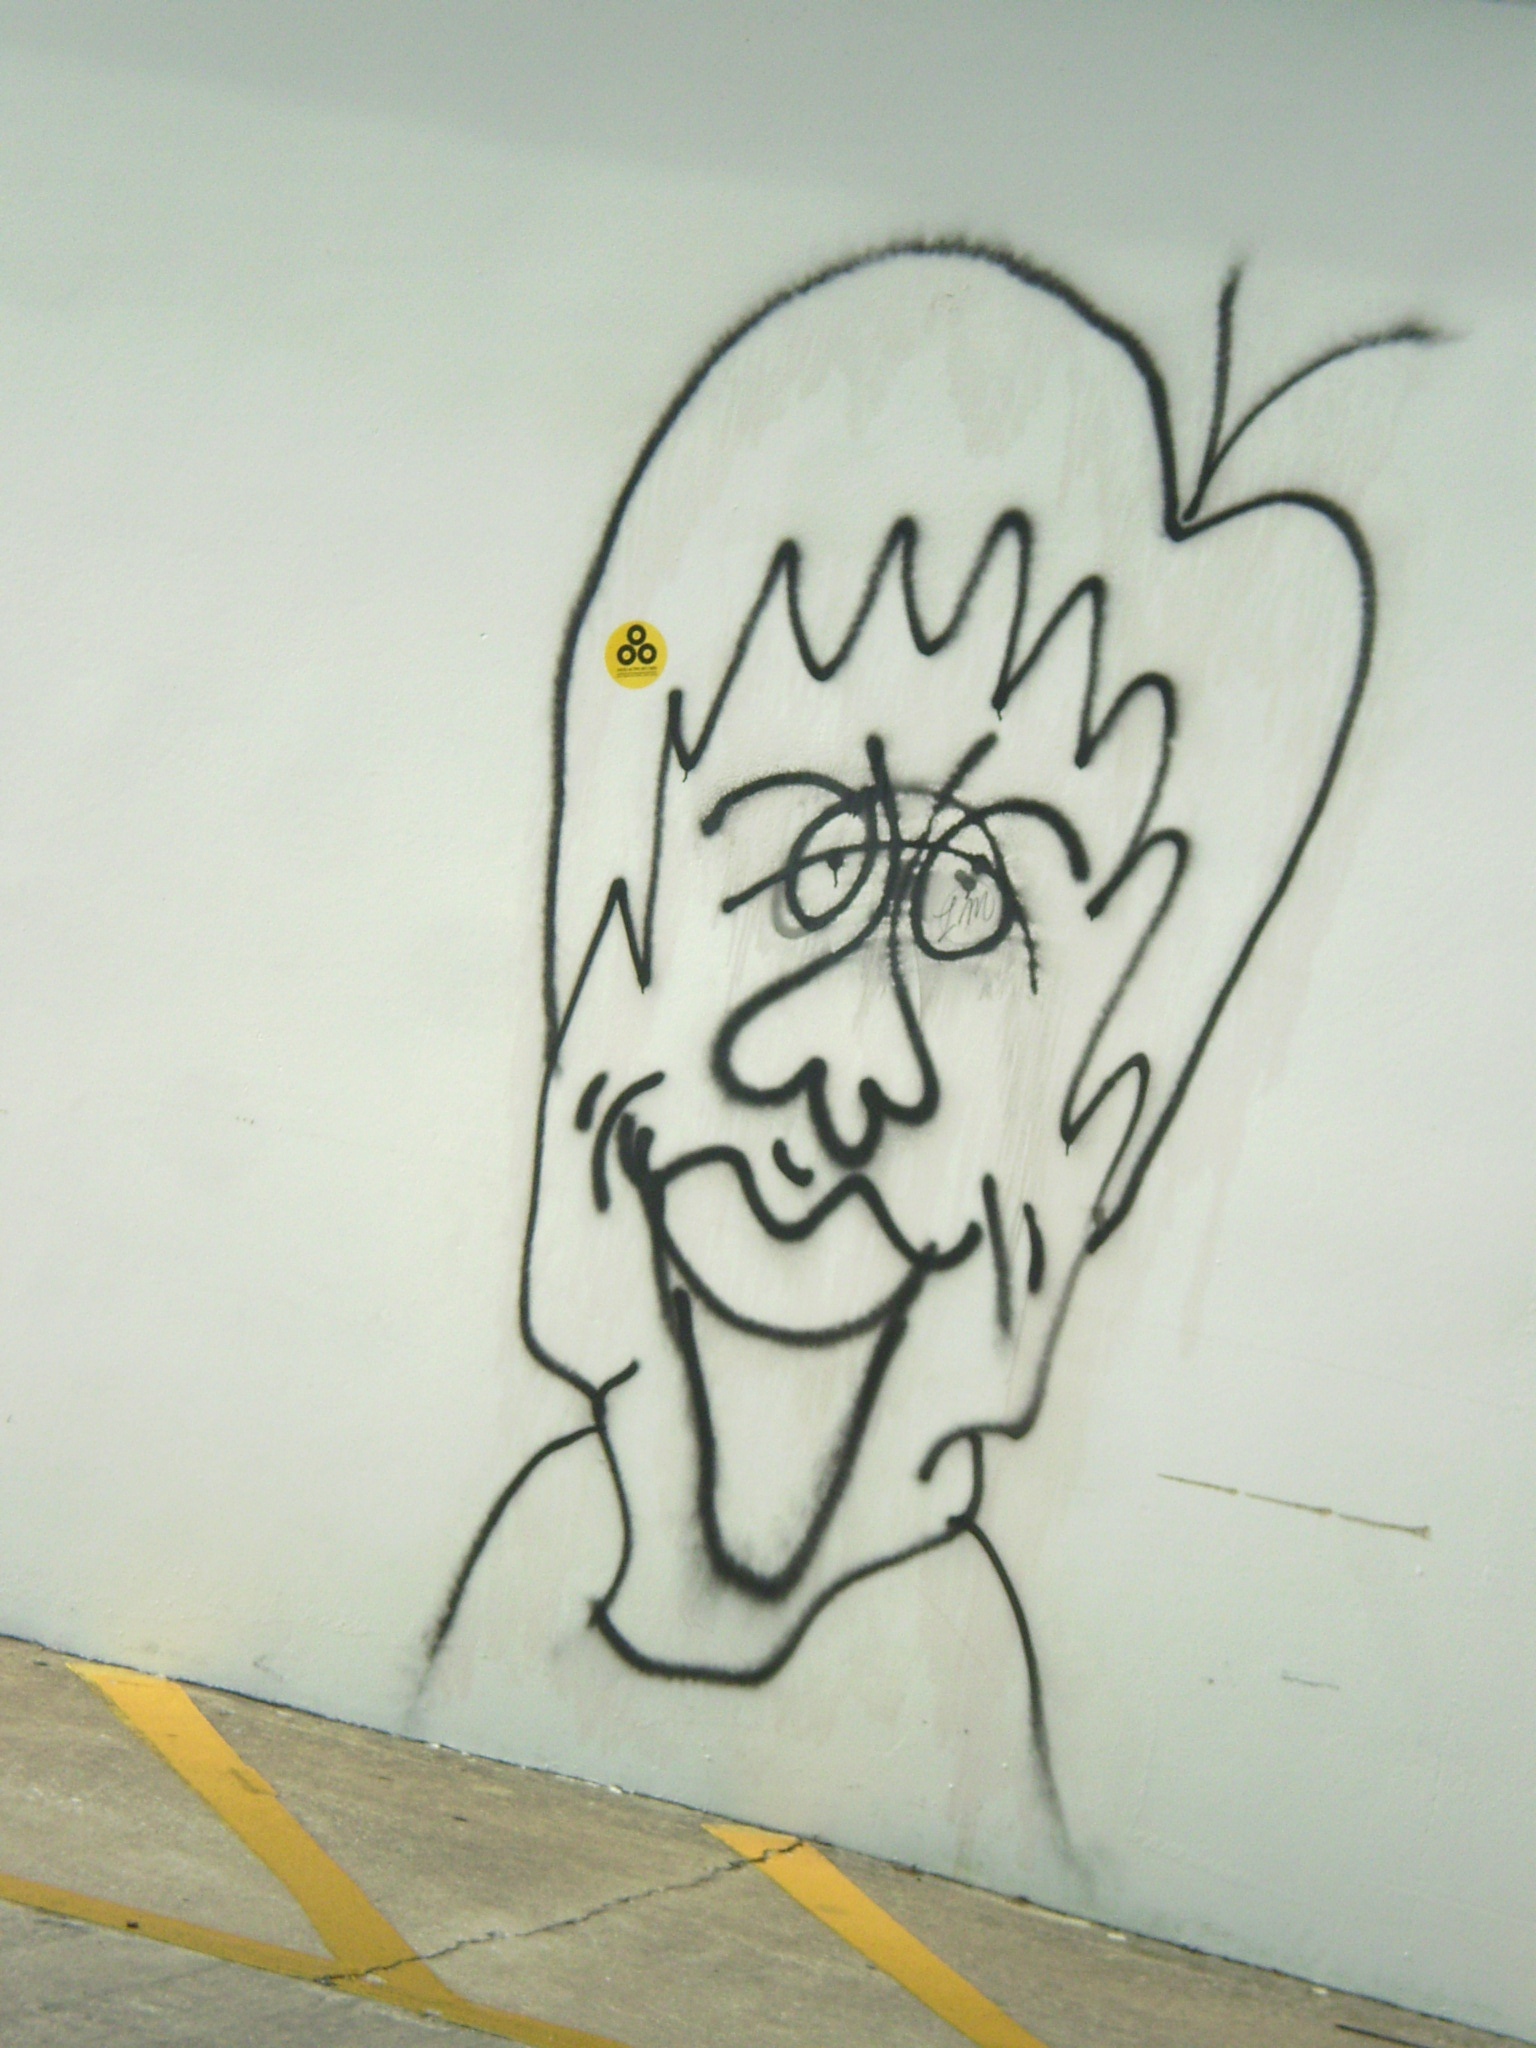 a graffiti painting of a man with glasses and a beard